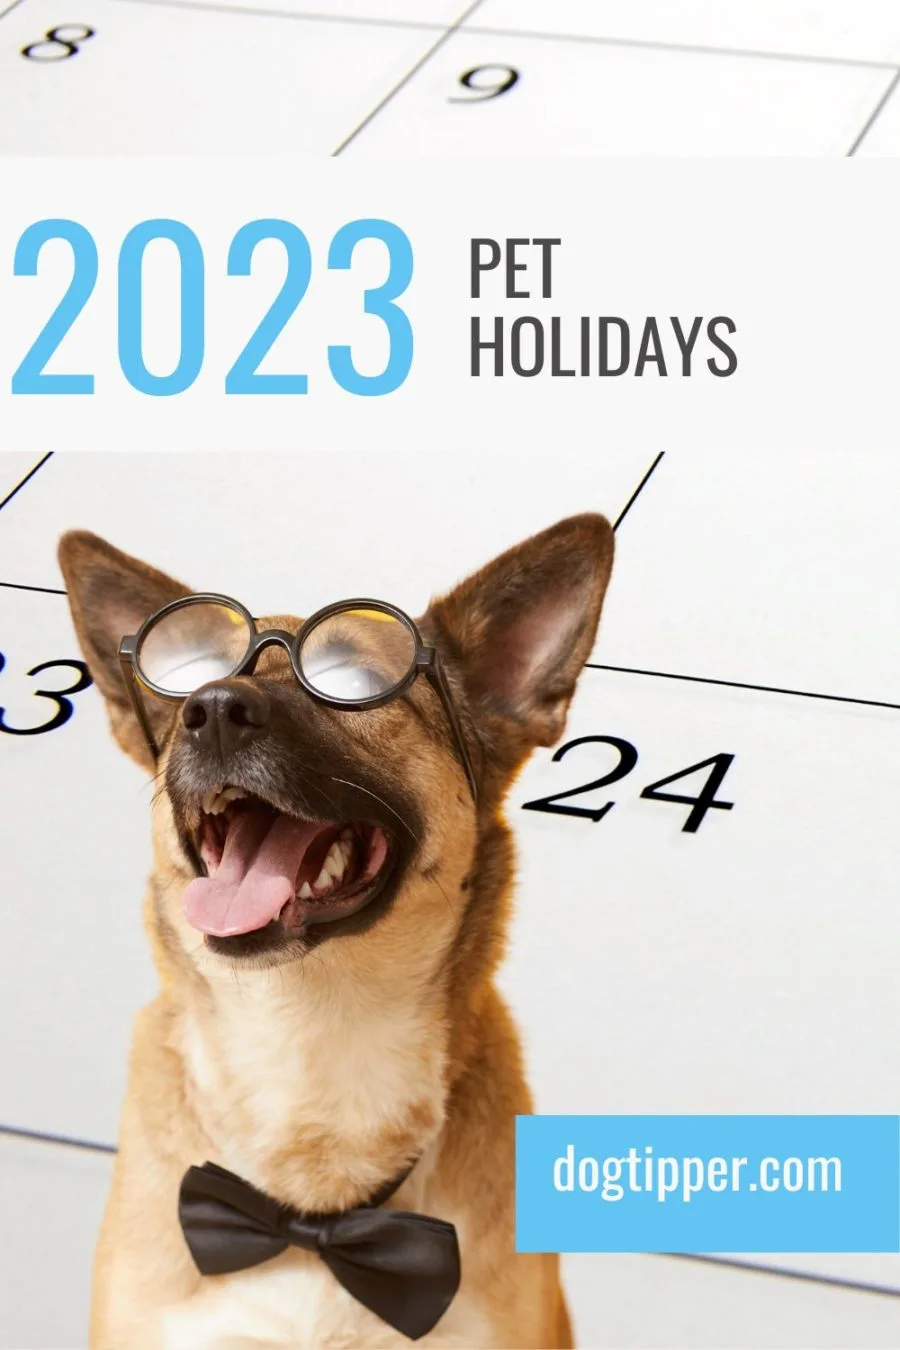 smiling dog wearing glasses with background of calendar; words 2023 pet holidays at top of image